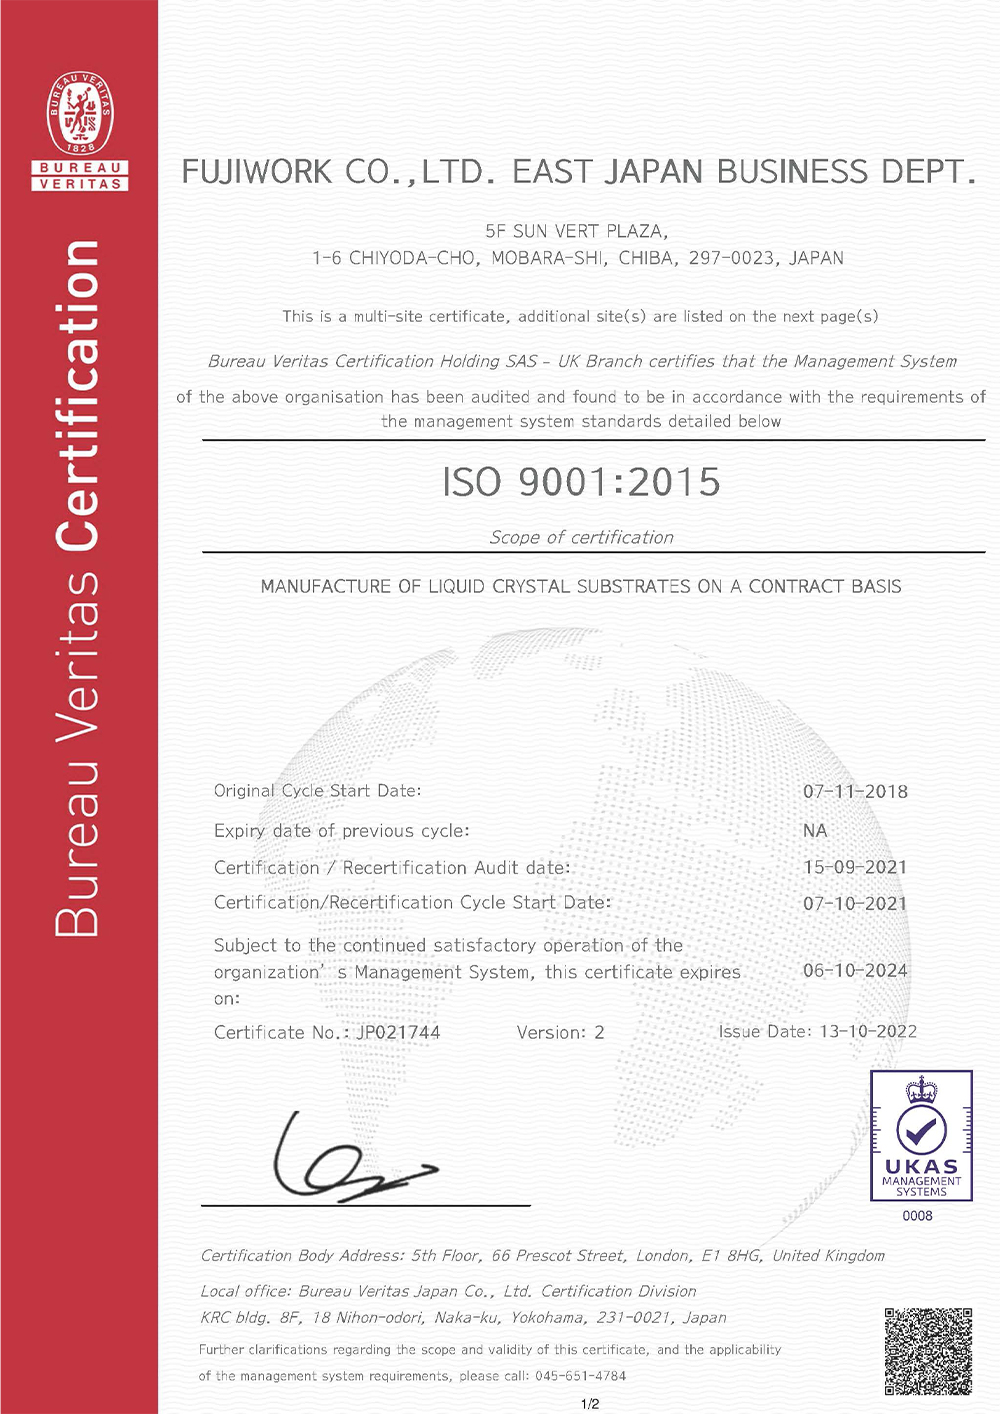 Quality Management System based on ISO9001:2015